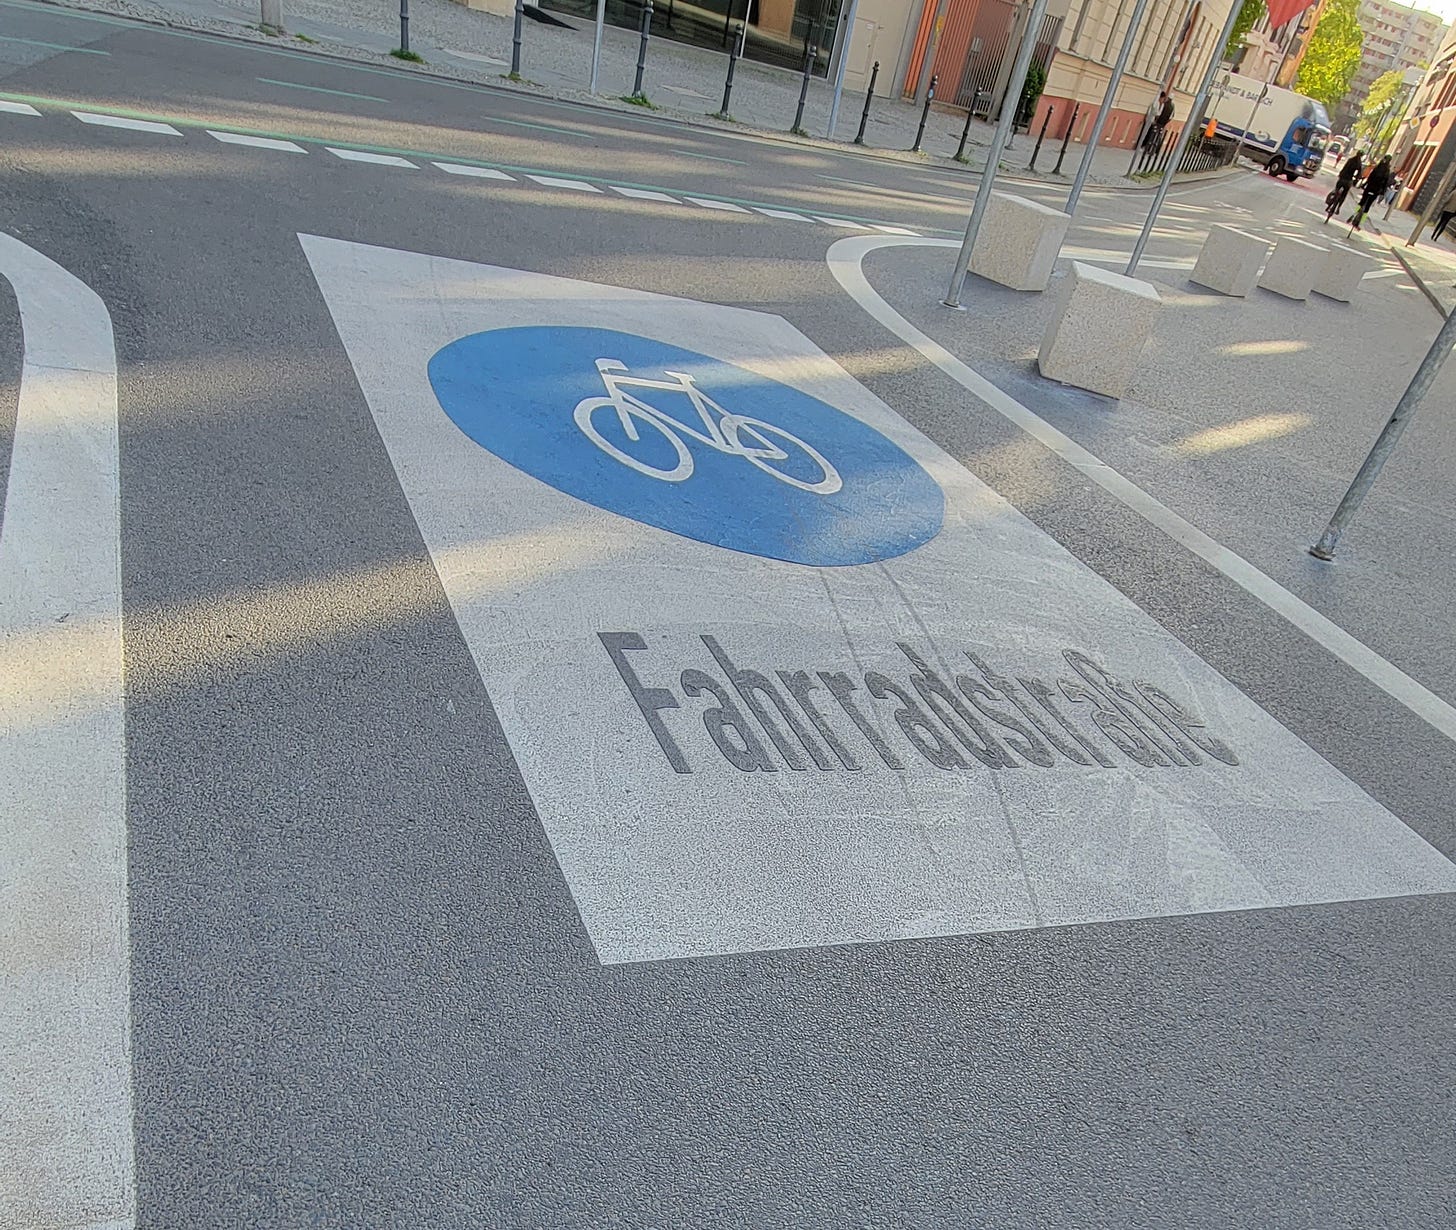 Painted image on street surface, white rectange with a blue circle in the middle. Inside the blue circle is the outline of a bicyle in white. The word Fahrradstraße is written in black below.